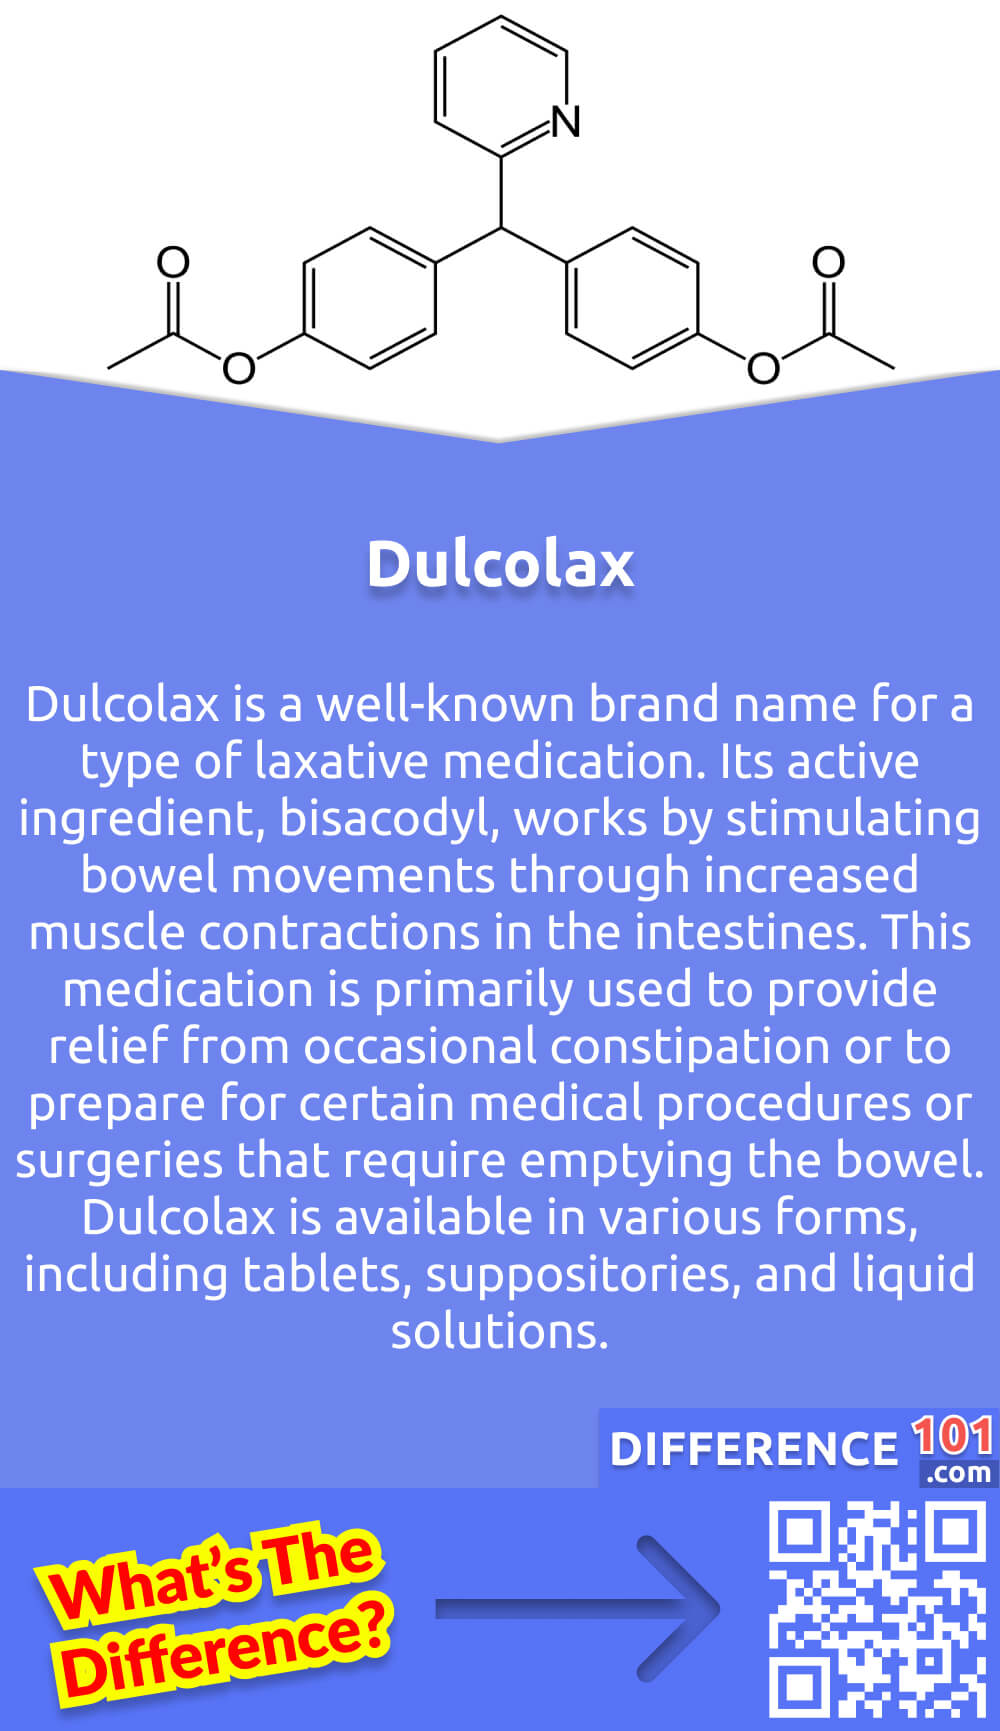 What Is Dulcolax? Dulcolax is a well-known brand name for a type of laxative medication. Its active ingredient, bisacodyl, works by stimulating bowel movements through increased muscle contractions in the intestines. This medication is primarily used to provide relief from occasional constipation or to prepare for certain medical procedures or surgeries that require emptying the bowel. Dulcolax is available in various forms, including tablets, suppositories, and liquid solutions. It is important to follow the directions of a healthcare professional or the instructions on the packaging when using Dulcolax. It is also recommended to consult with a healthcare provider before using this medication, as it may not be suitable for everyone.